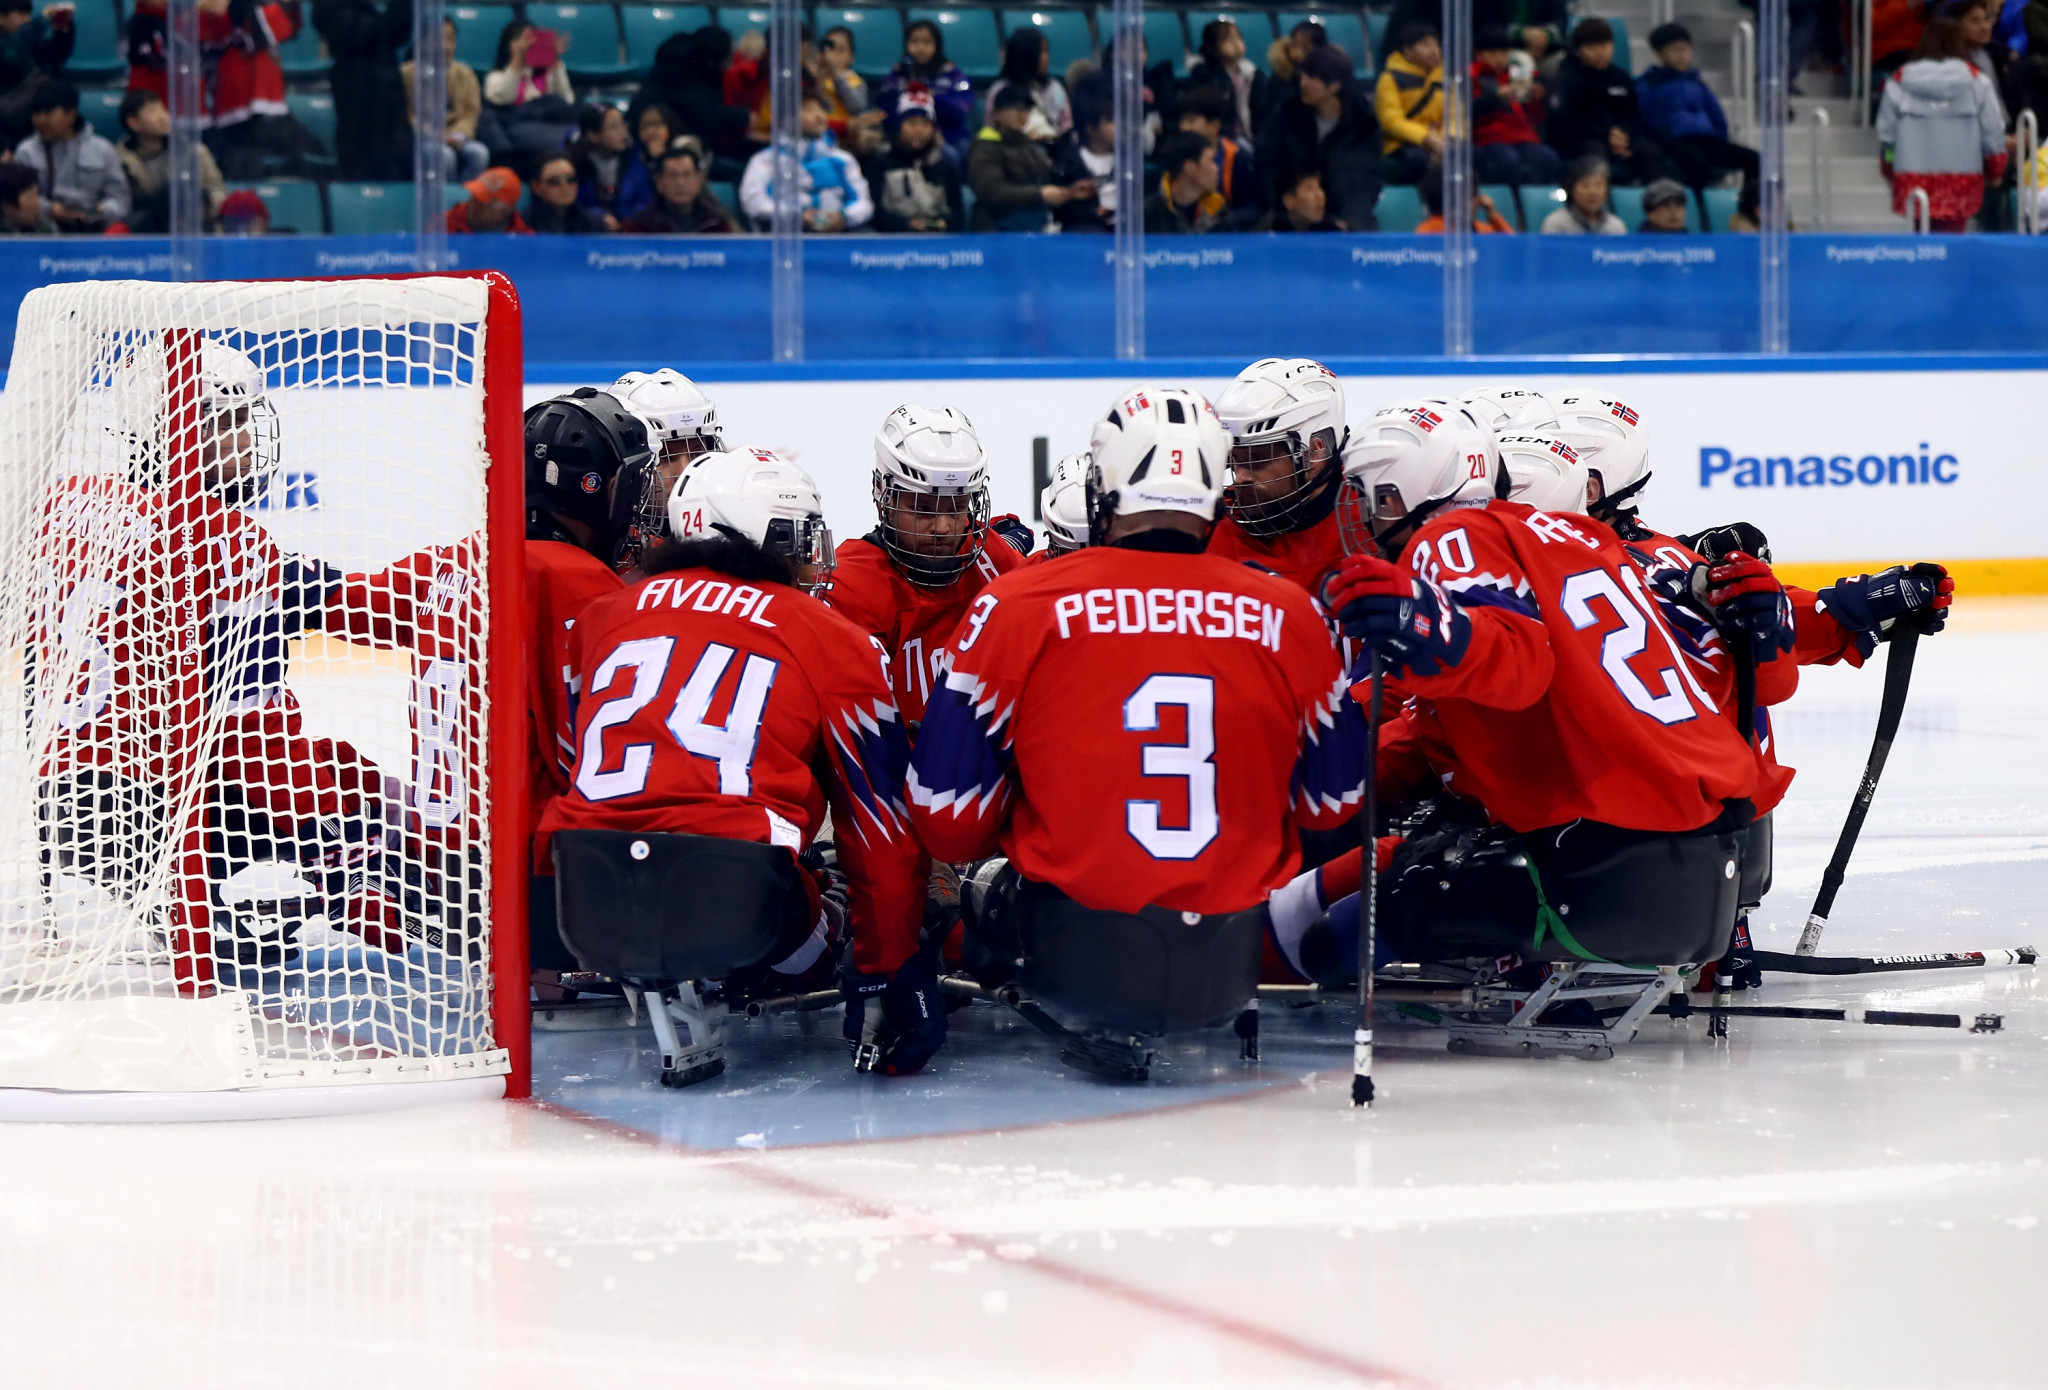 Norway hold a team huddle before taking on Italy at the Gangneung Hockey Centre ©Getty Images